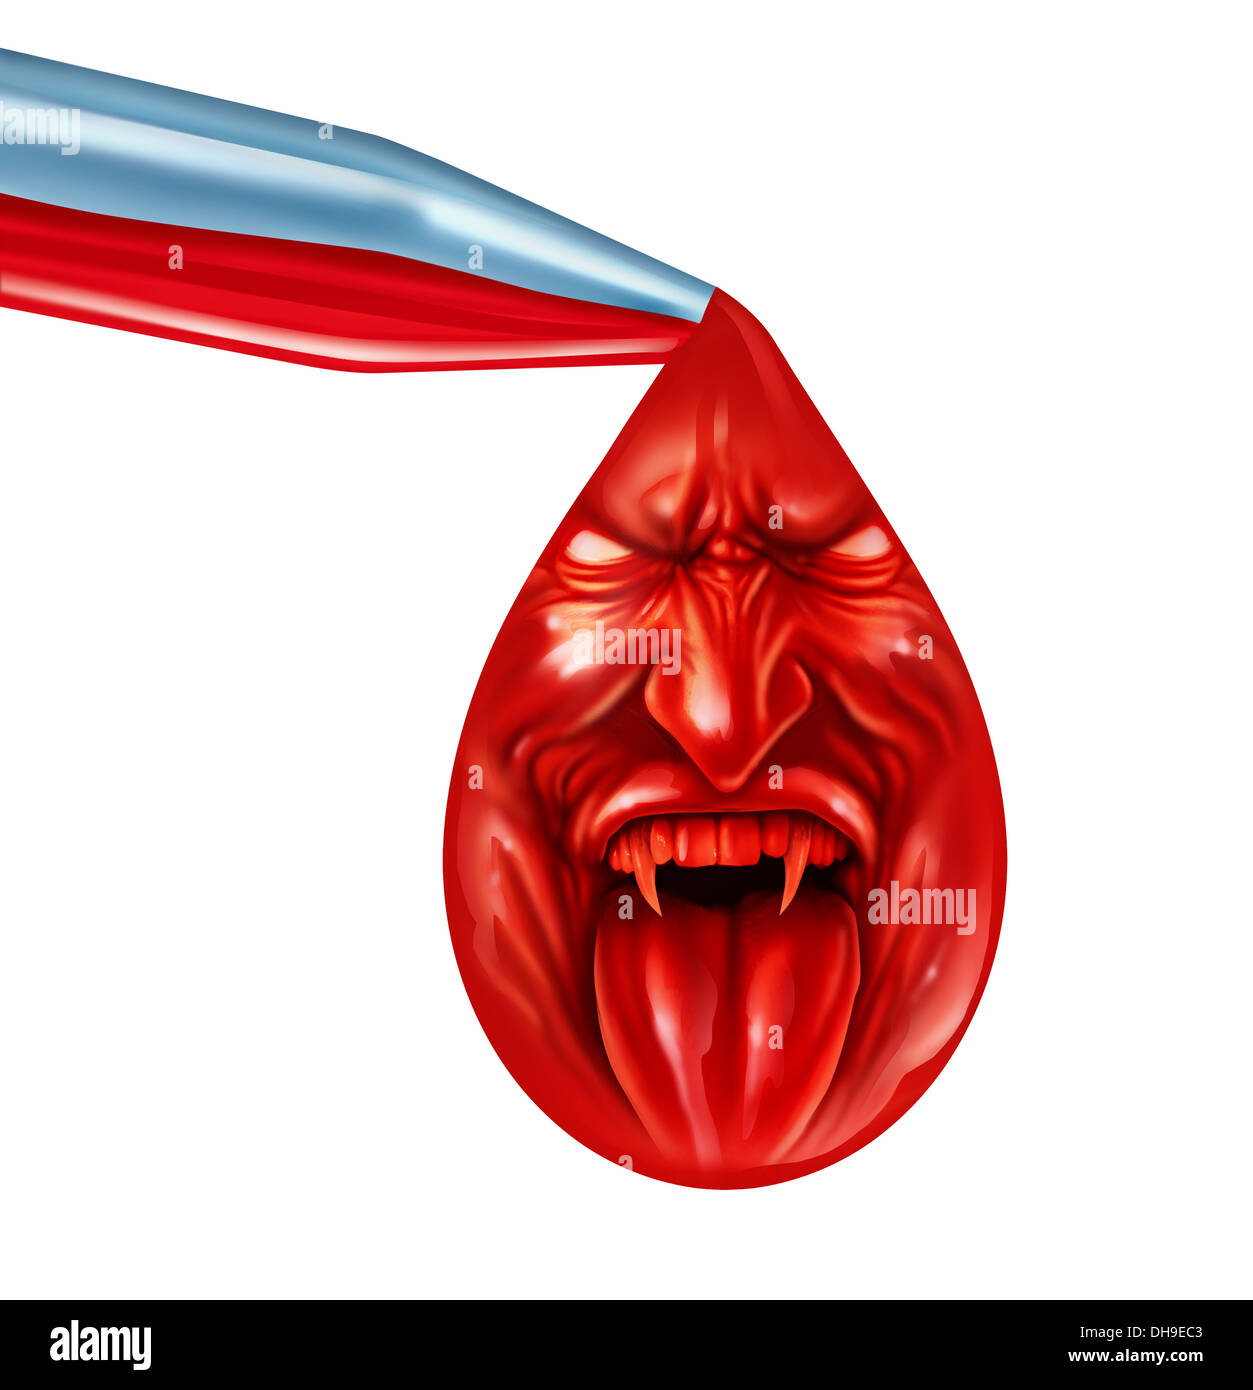 Tainted blood supply health care concept with a glass dropper with human red liquid dropping a single drop with the face of a demon with an evil expression as a medical metaphor for infectious disease screening safety and the dangers of contamination on w Stock Photo